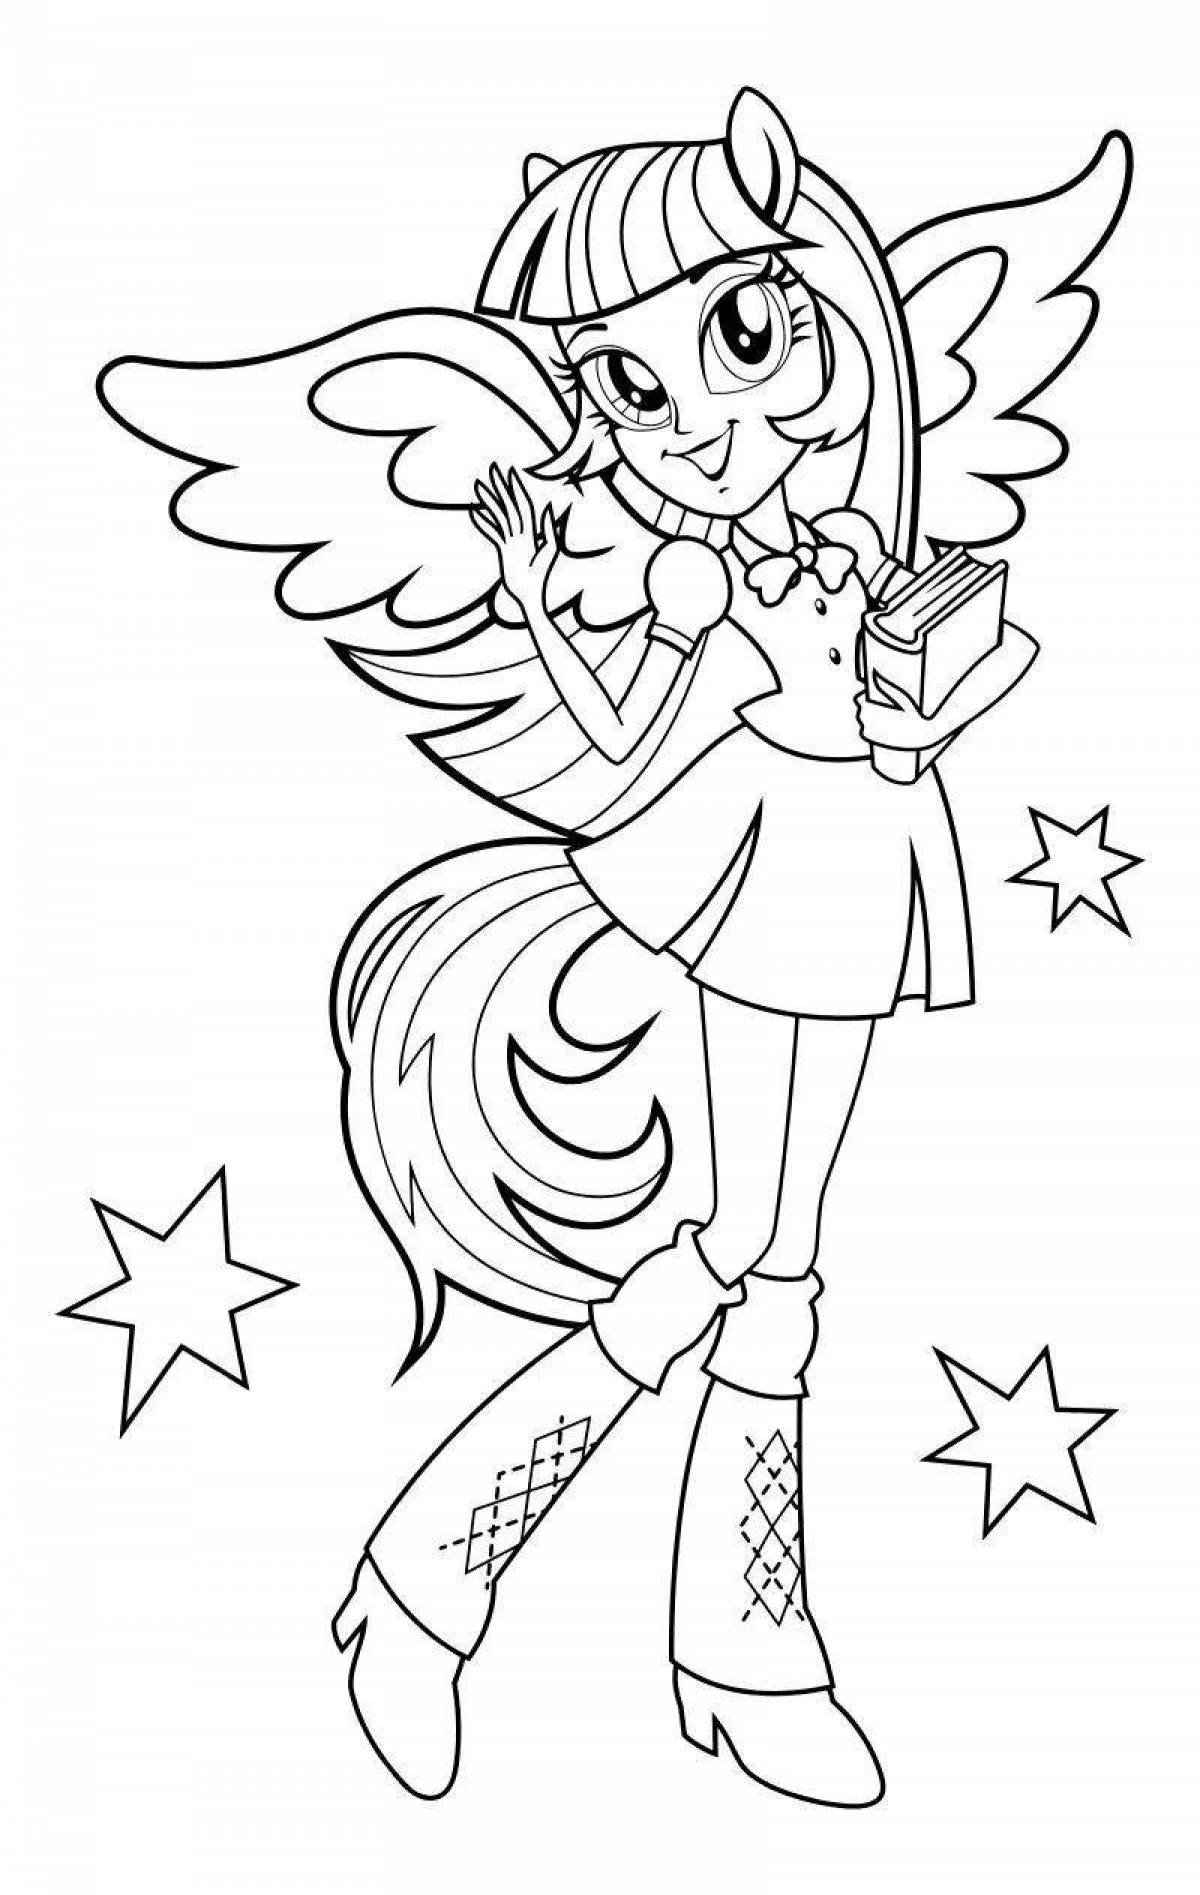 Sparkle equestria girl coloring page